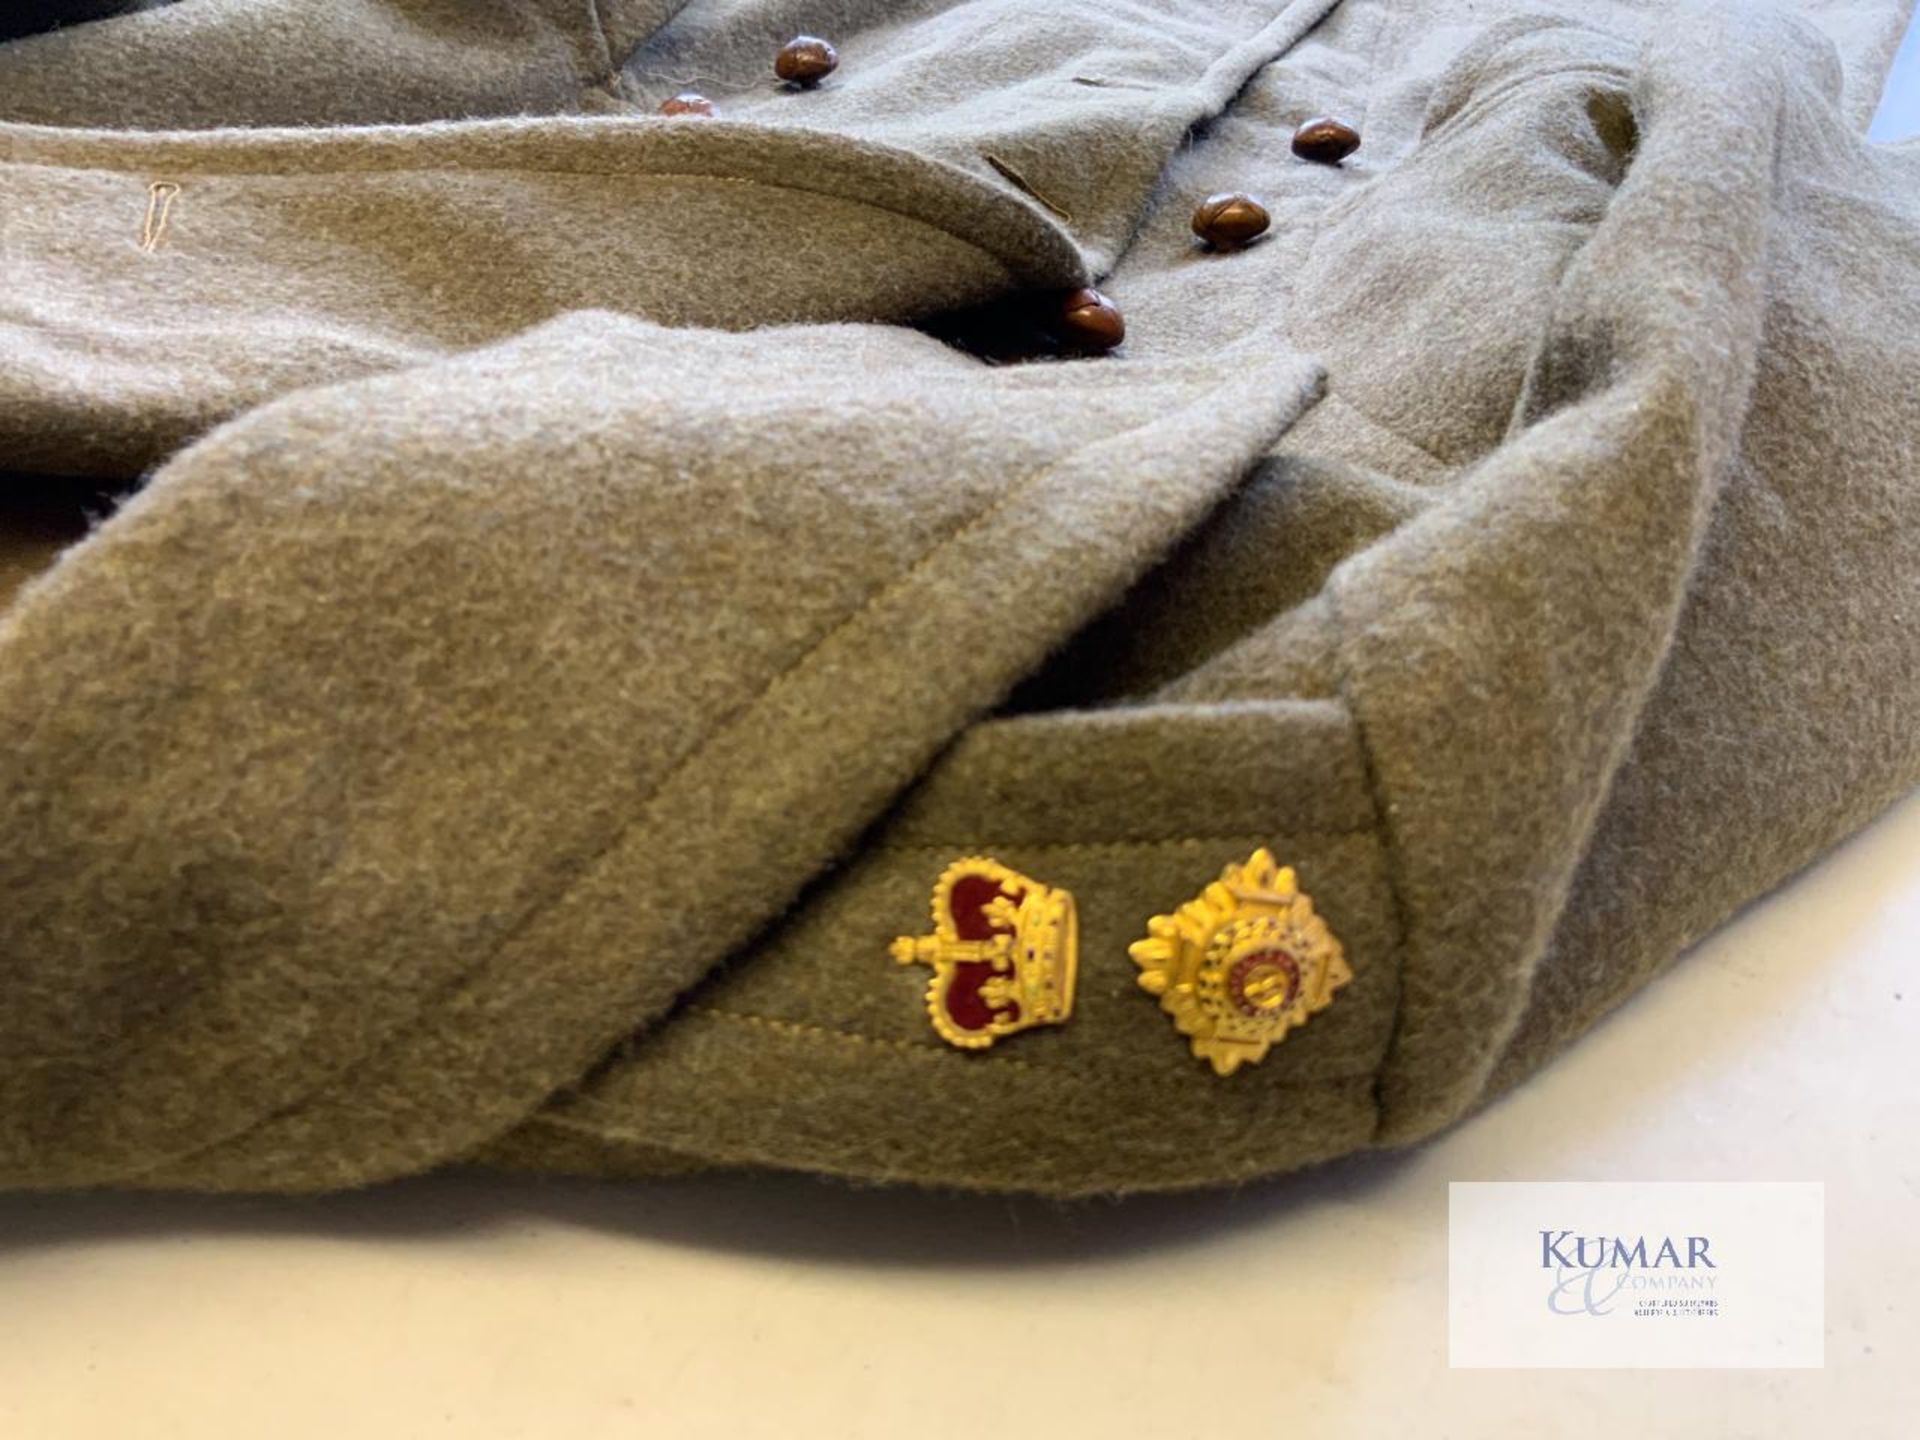 Great Coats Dismounted 1940 Size No.8 Military Style Overcoat with Metal Helmet, Fire Guard Emblem & - Image 11 of 14